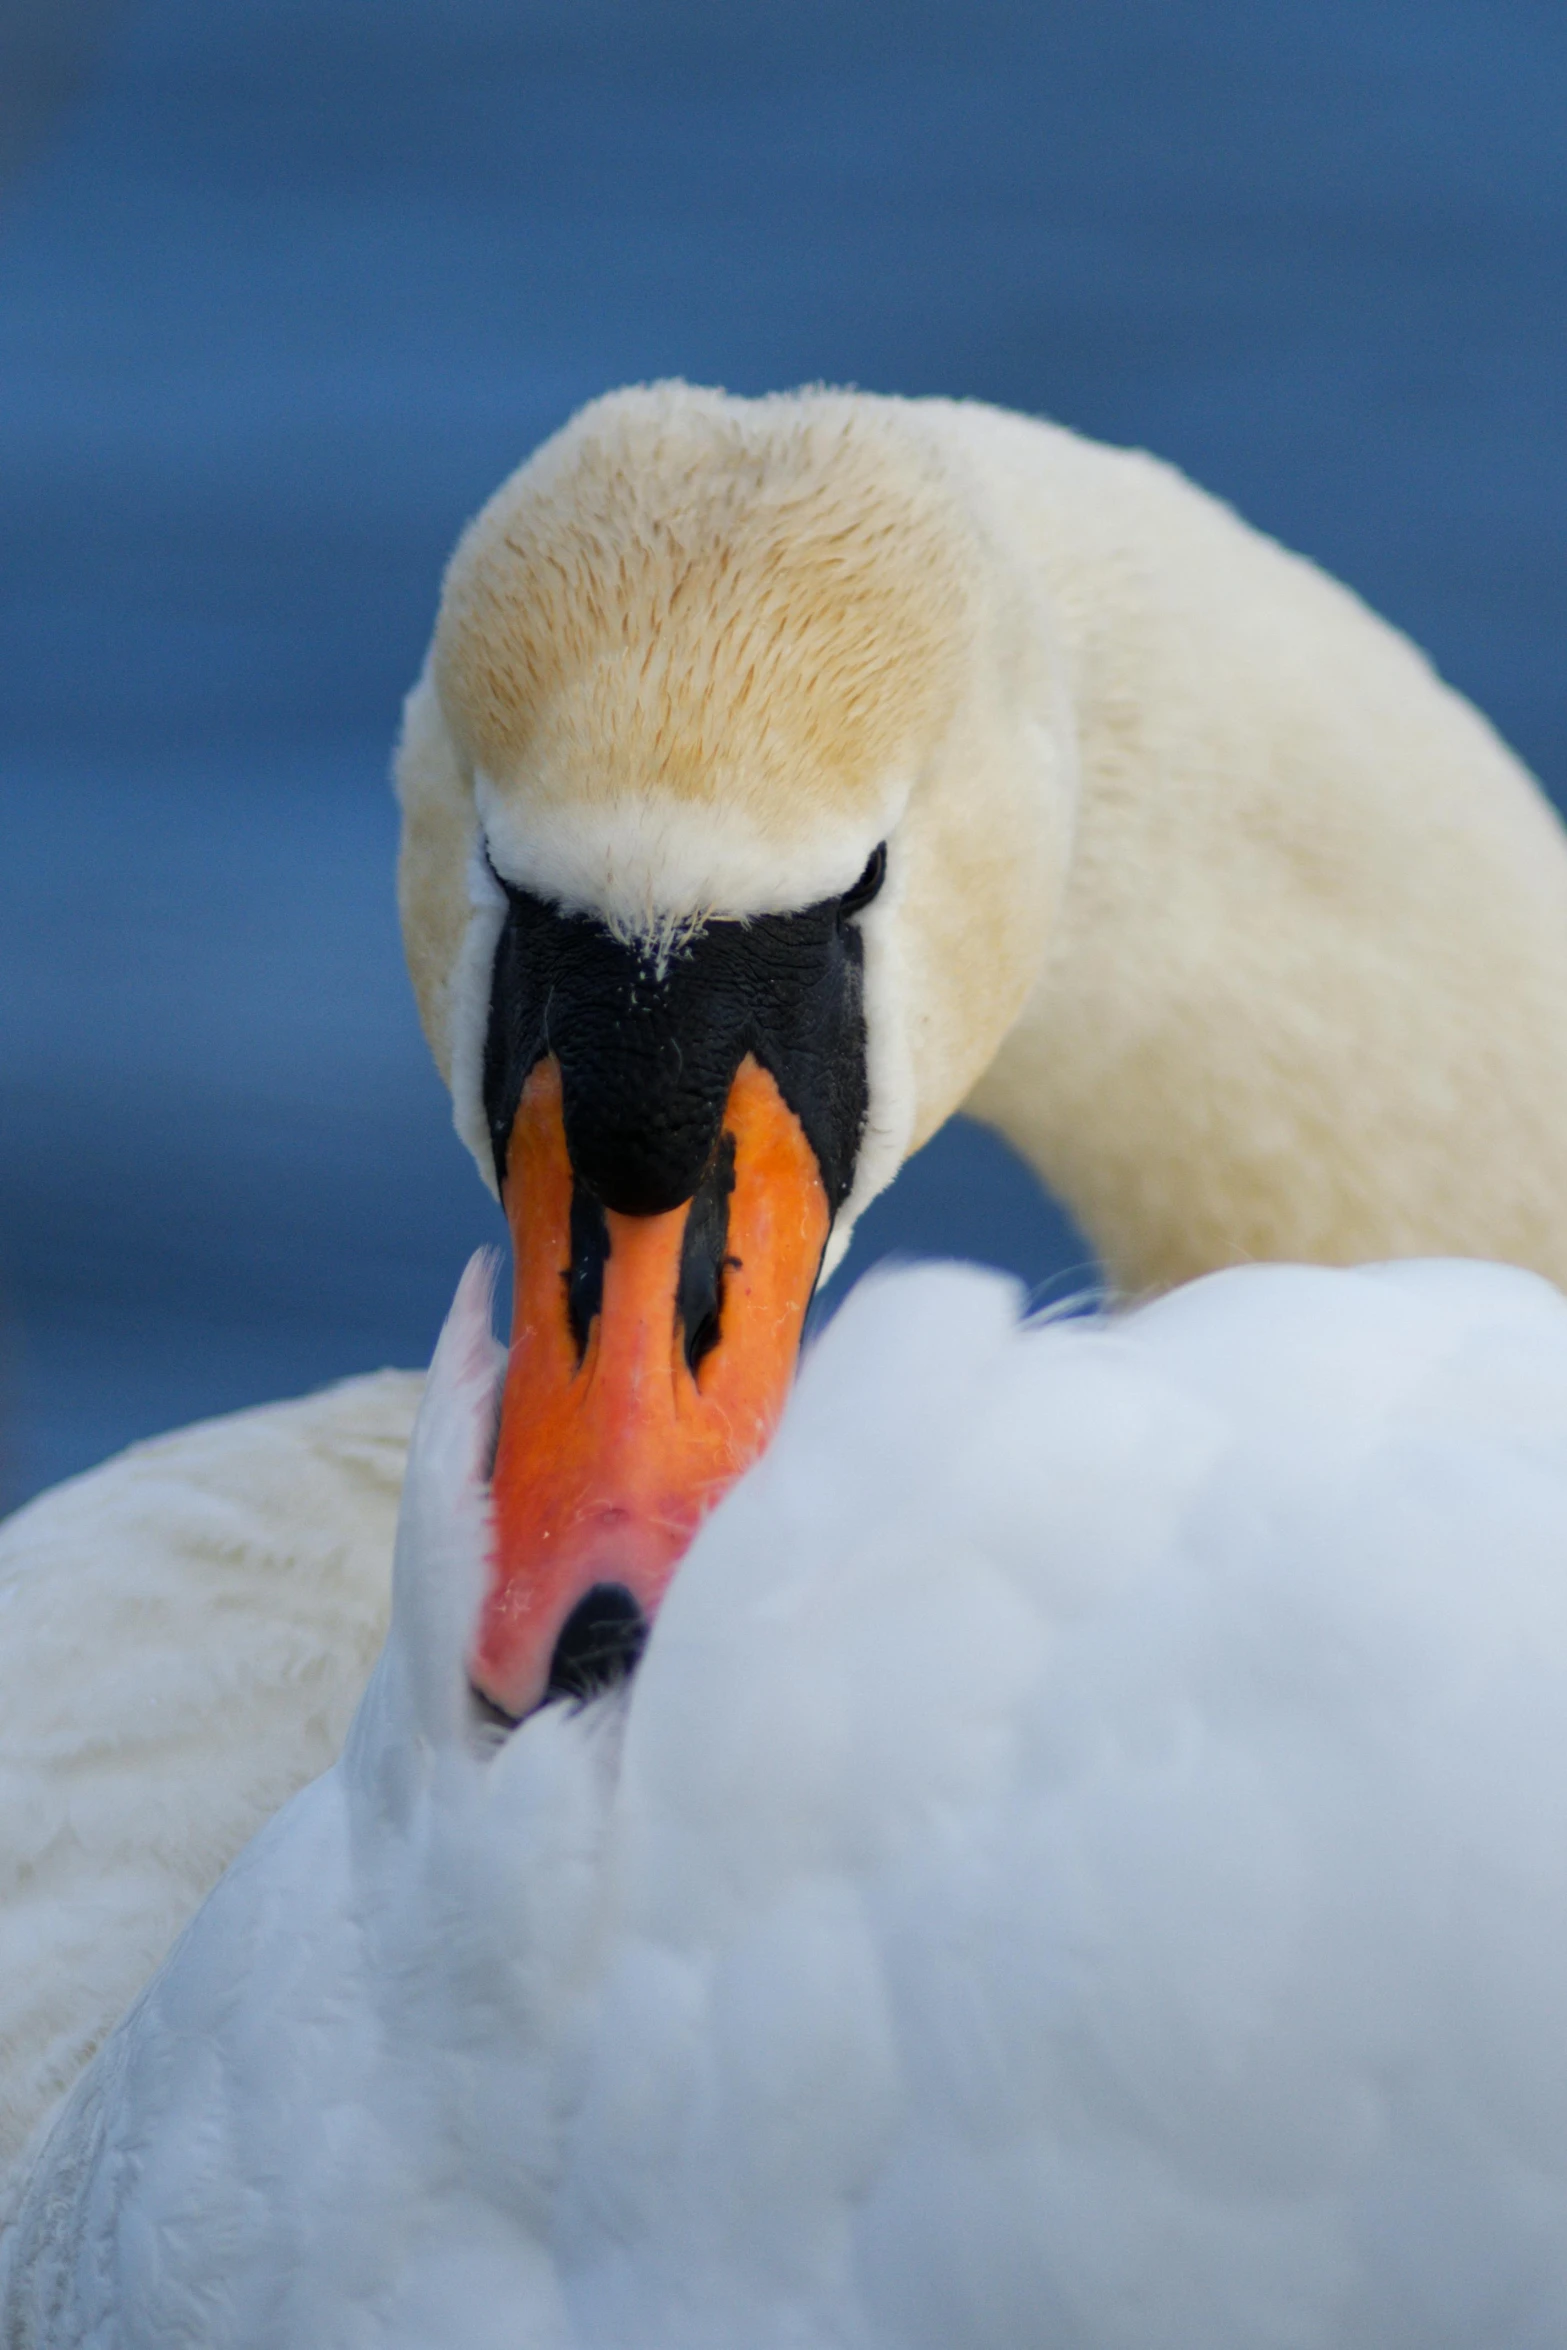 a close - up view of a swan with an orange beak